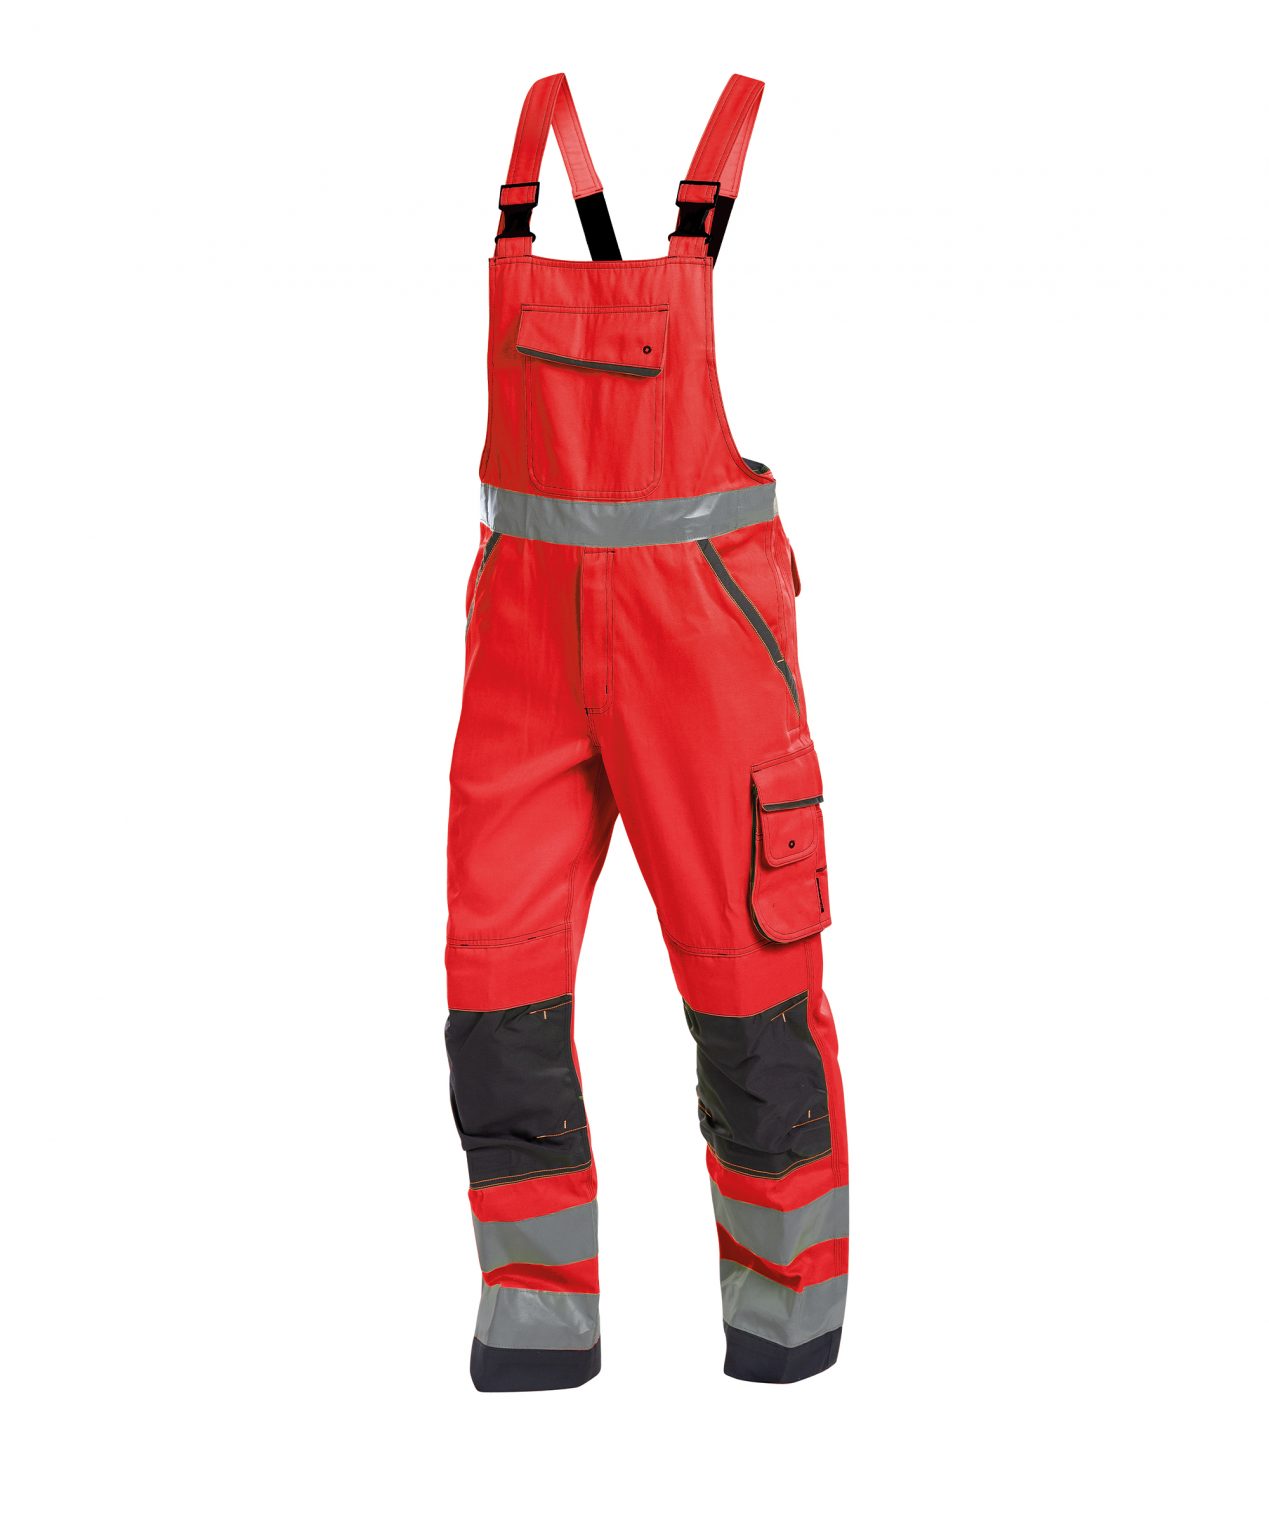 malmedy high visibility brace overall with knee pockets fluo red cement grey front